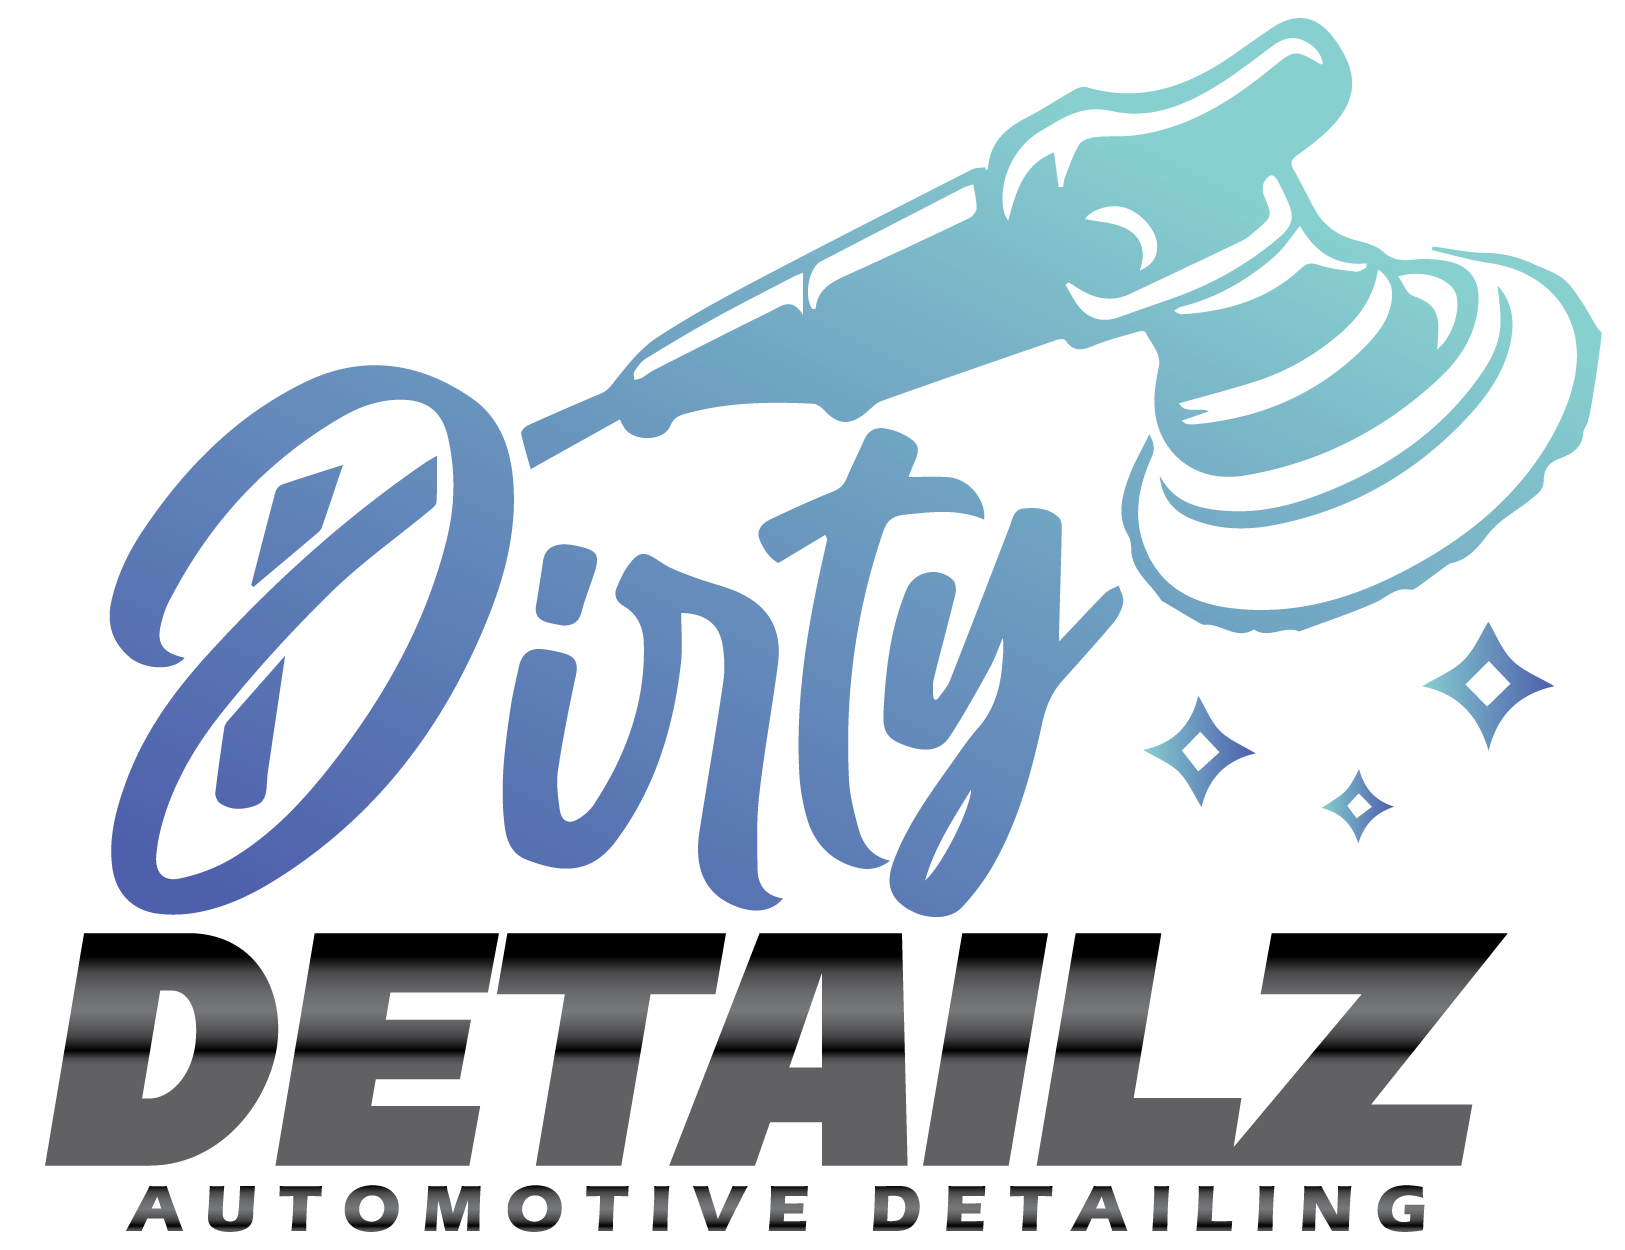 Dirty's Detail Lab